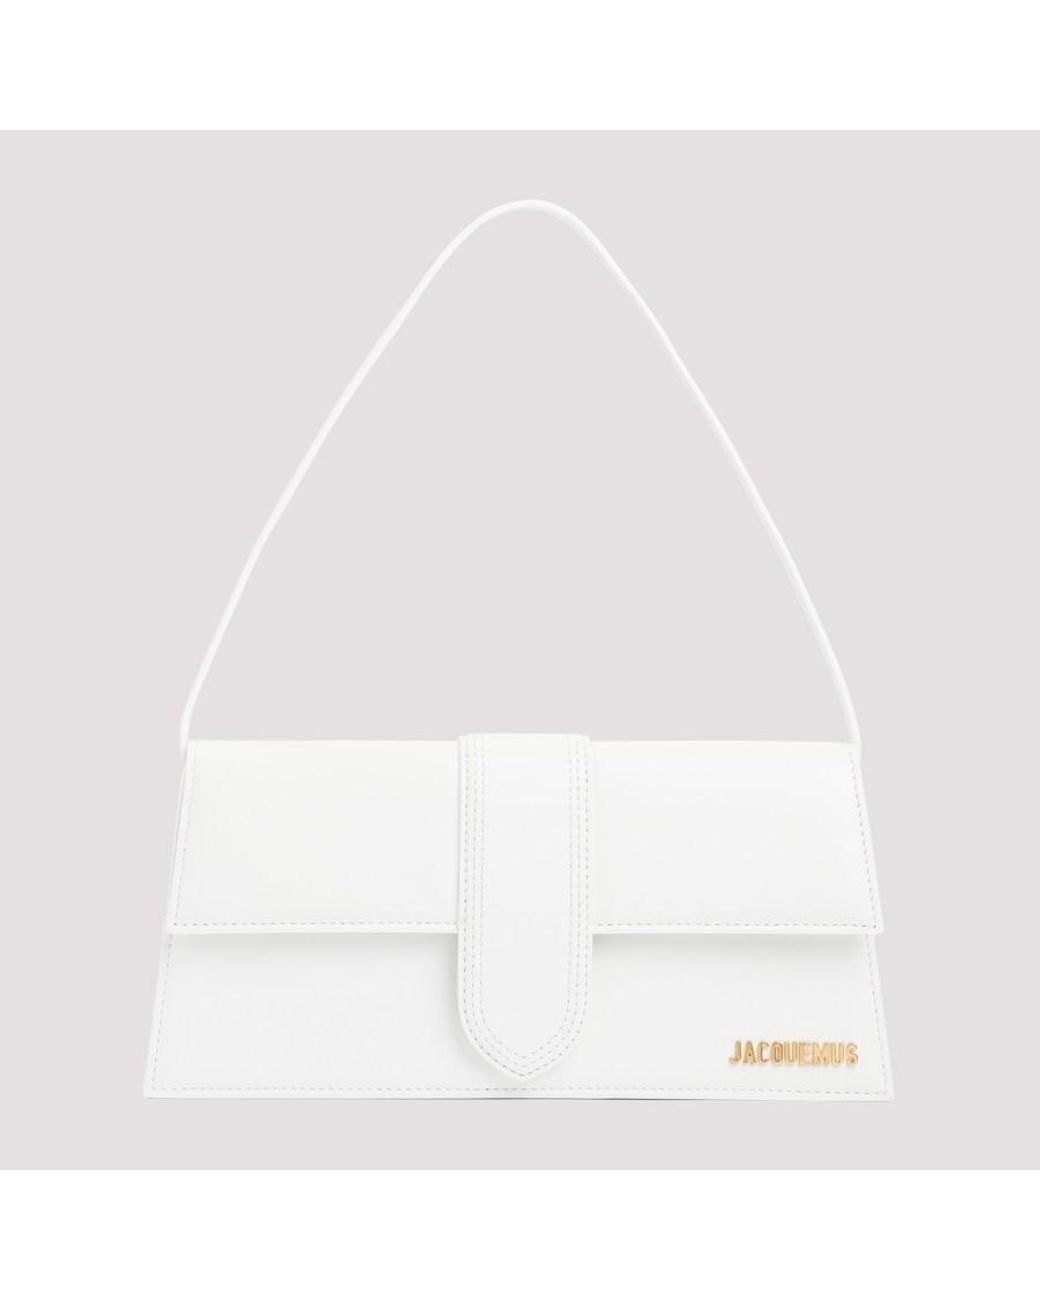 Jacquemus Jaquemus Le Bambino Long Unica in White | Lyst